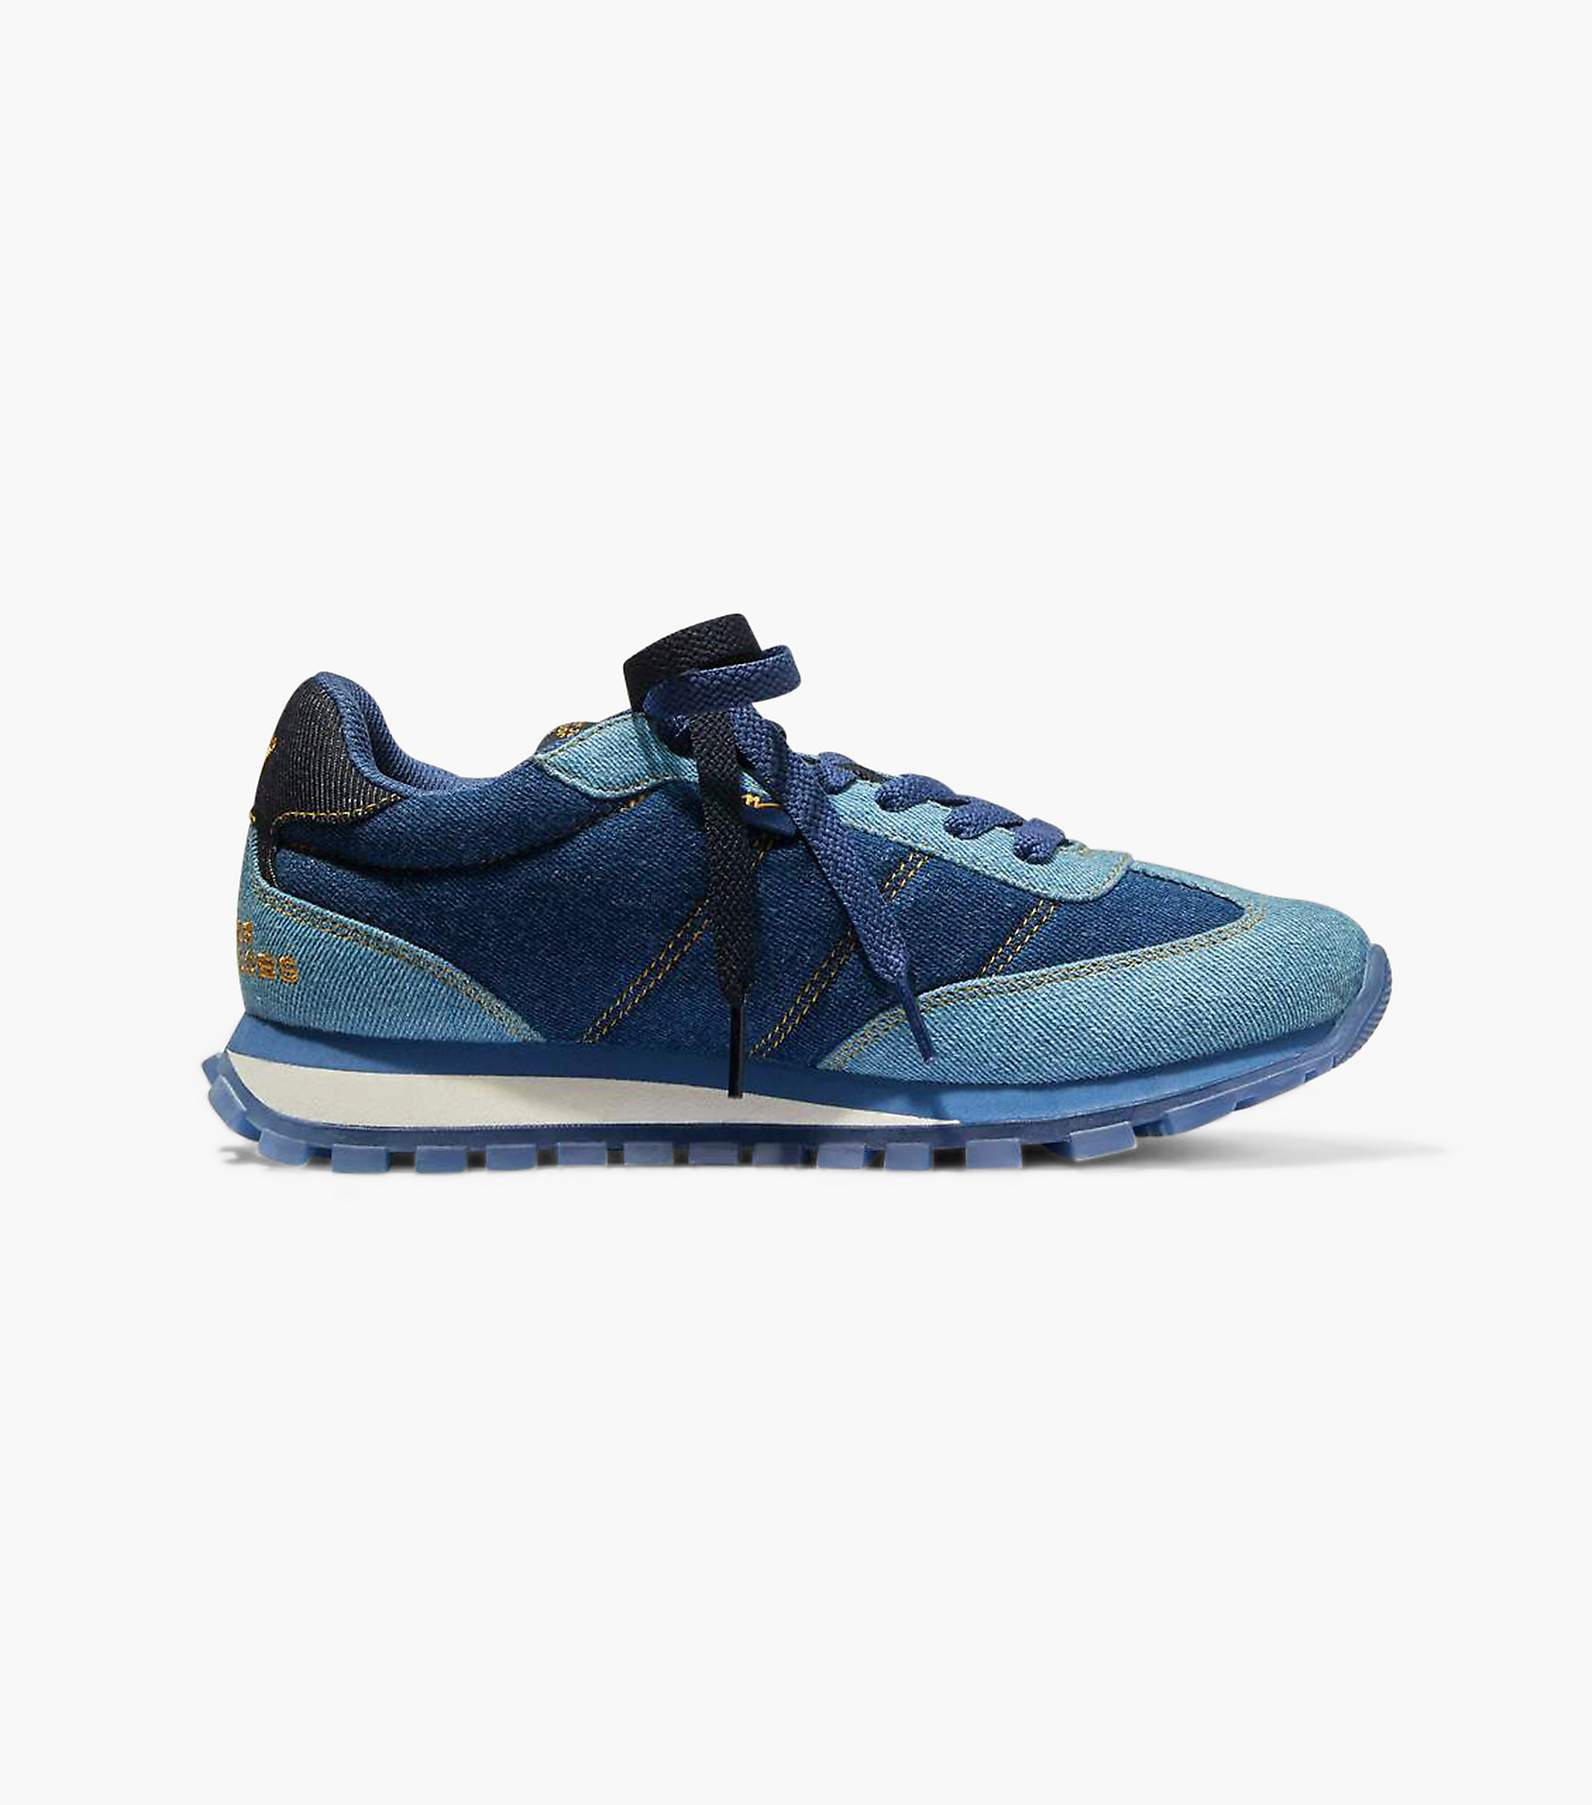 Marc Jacobs Blue 'The Denim Jogger' Sneakers